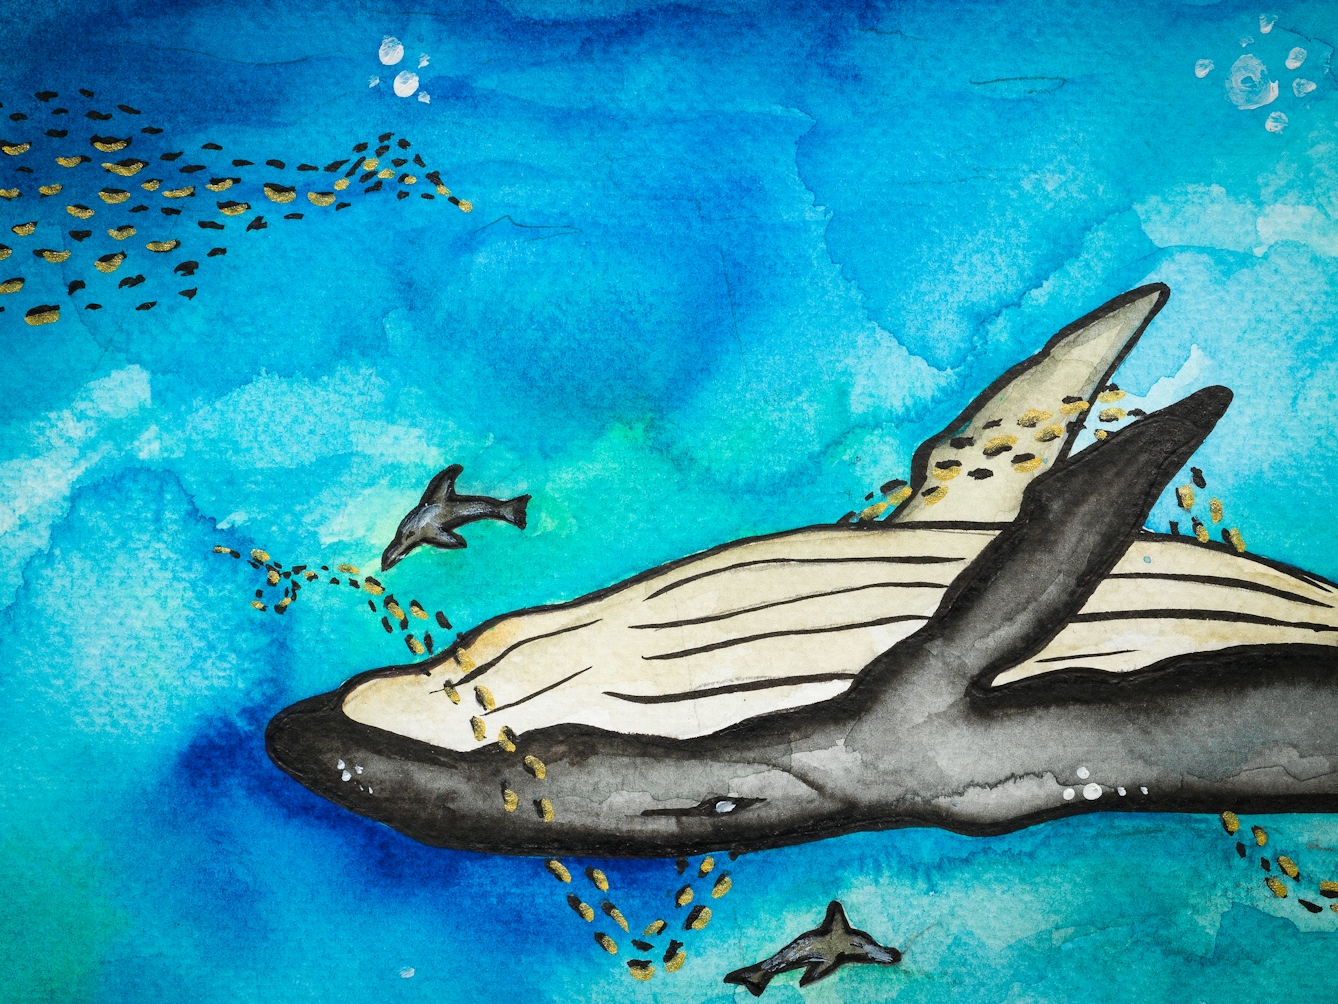 Detail from a larger colourful watercolour artwork. The artwork shows an underwater scene with a whale in the centre. A shoal of small fish are swimming around the whale. There is another shoal of small fish to the left of the whale. 